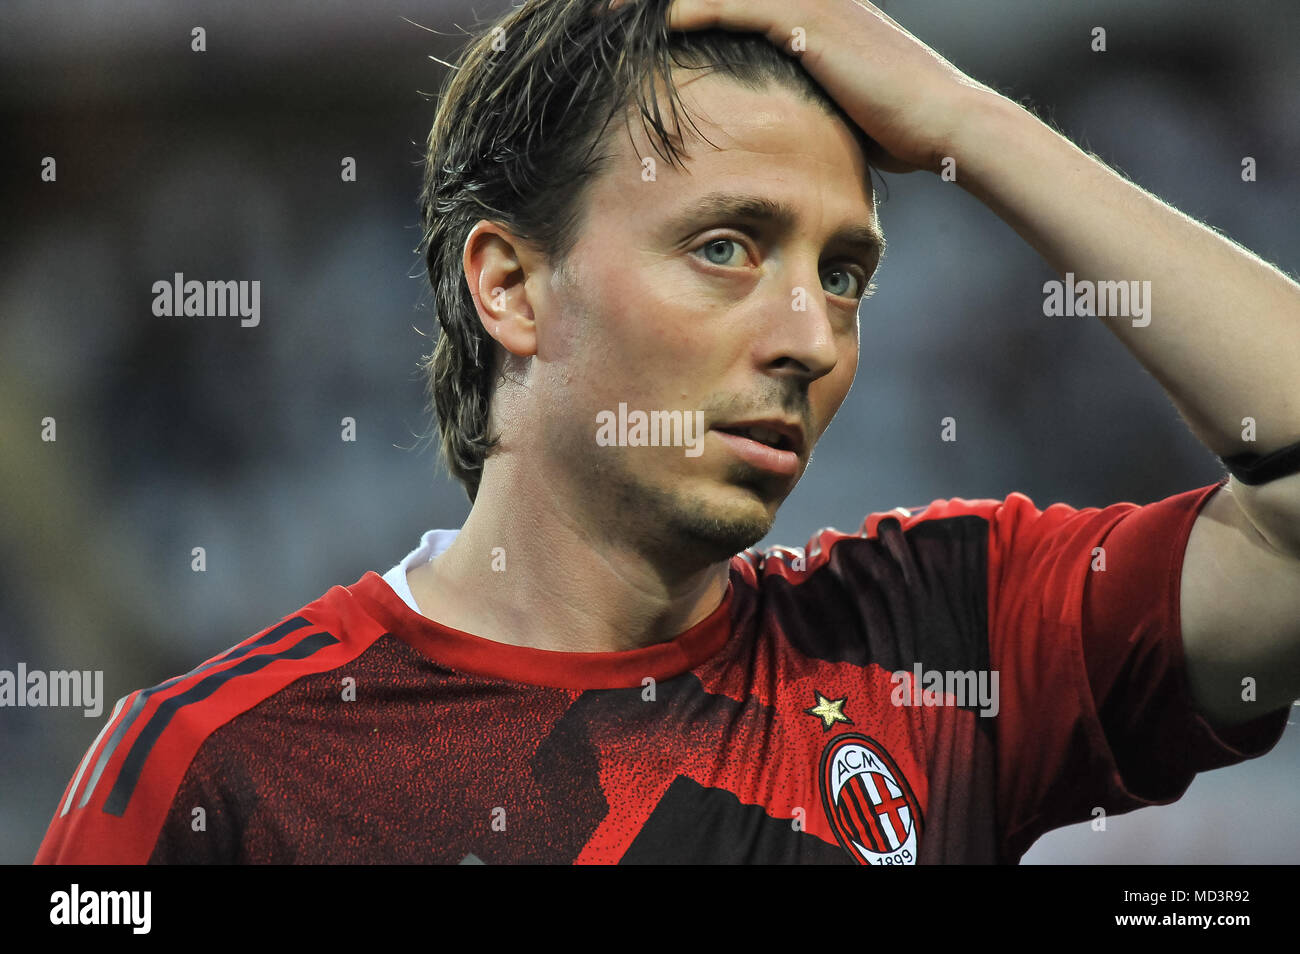 Turin, Italy. 18th Apr, 2018. Riccardo Montolivo (AC Milan) during the  Serie A football match between Torino FC and AC Milan at Stadio Grande  Torino on 18th April, 2018 in Turin, Italy.